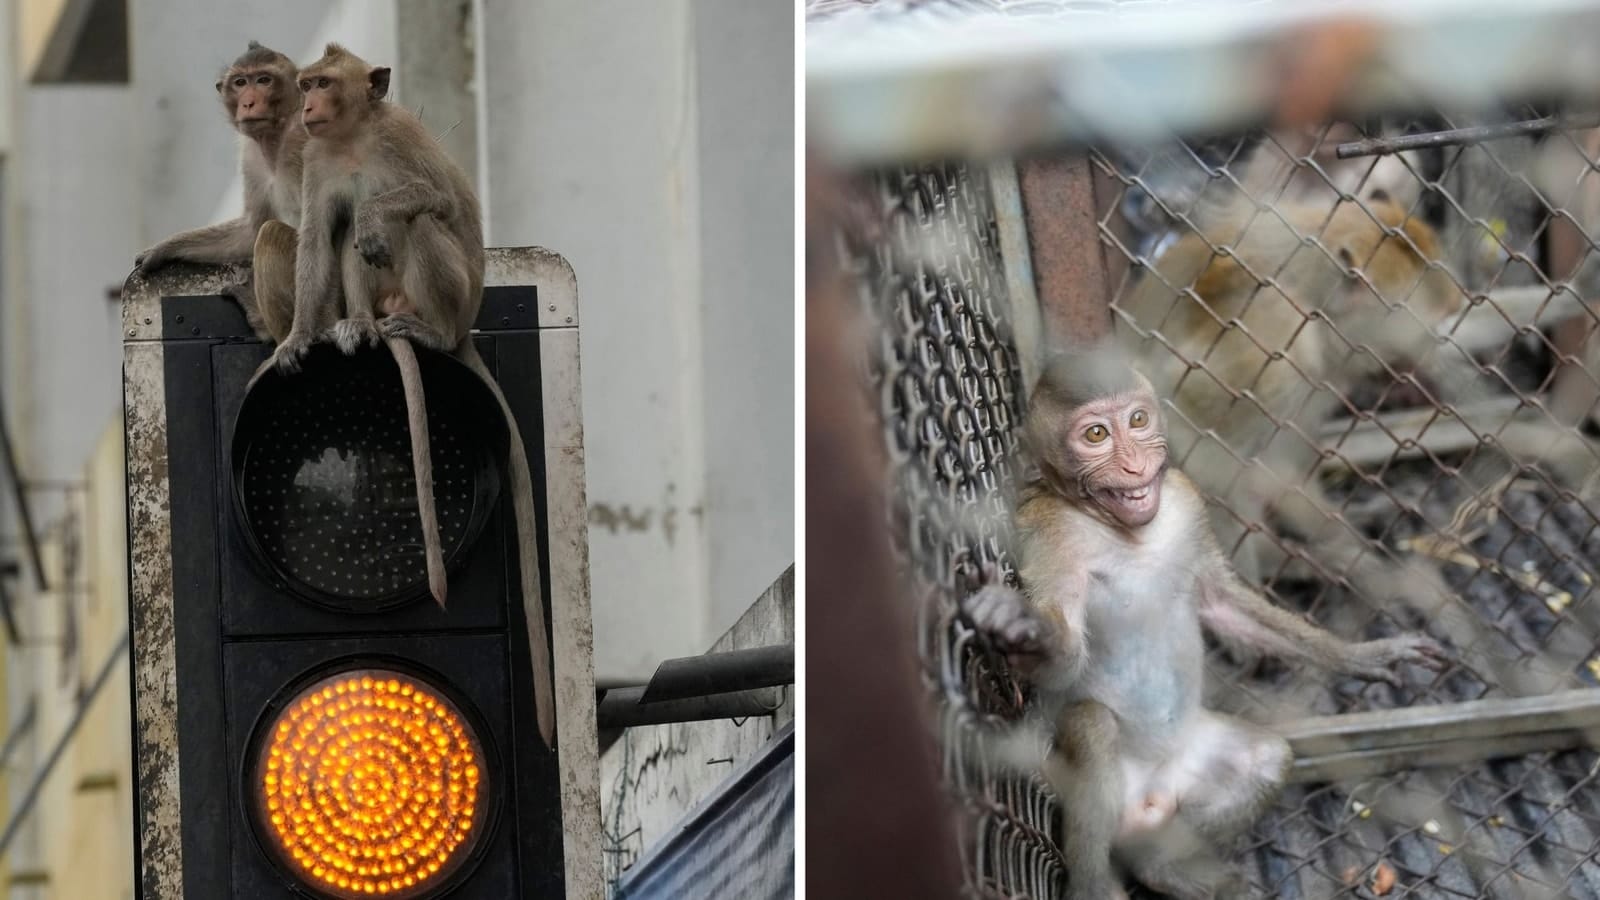 Town launches special mission to tackle marauding wild monkeys, tricks them with fruits